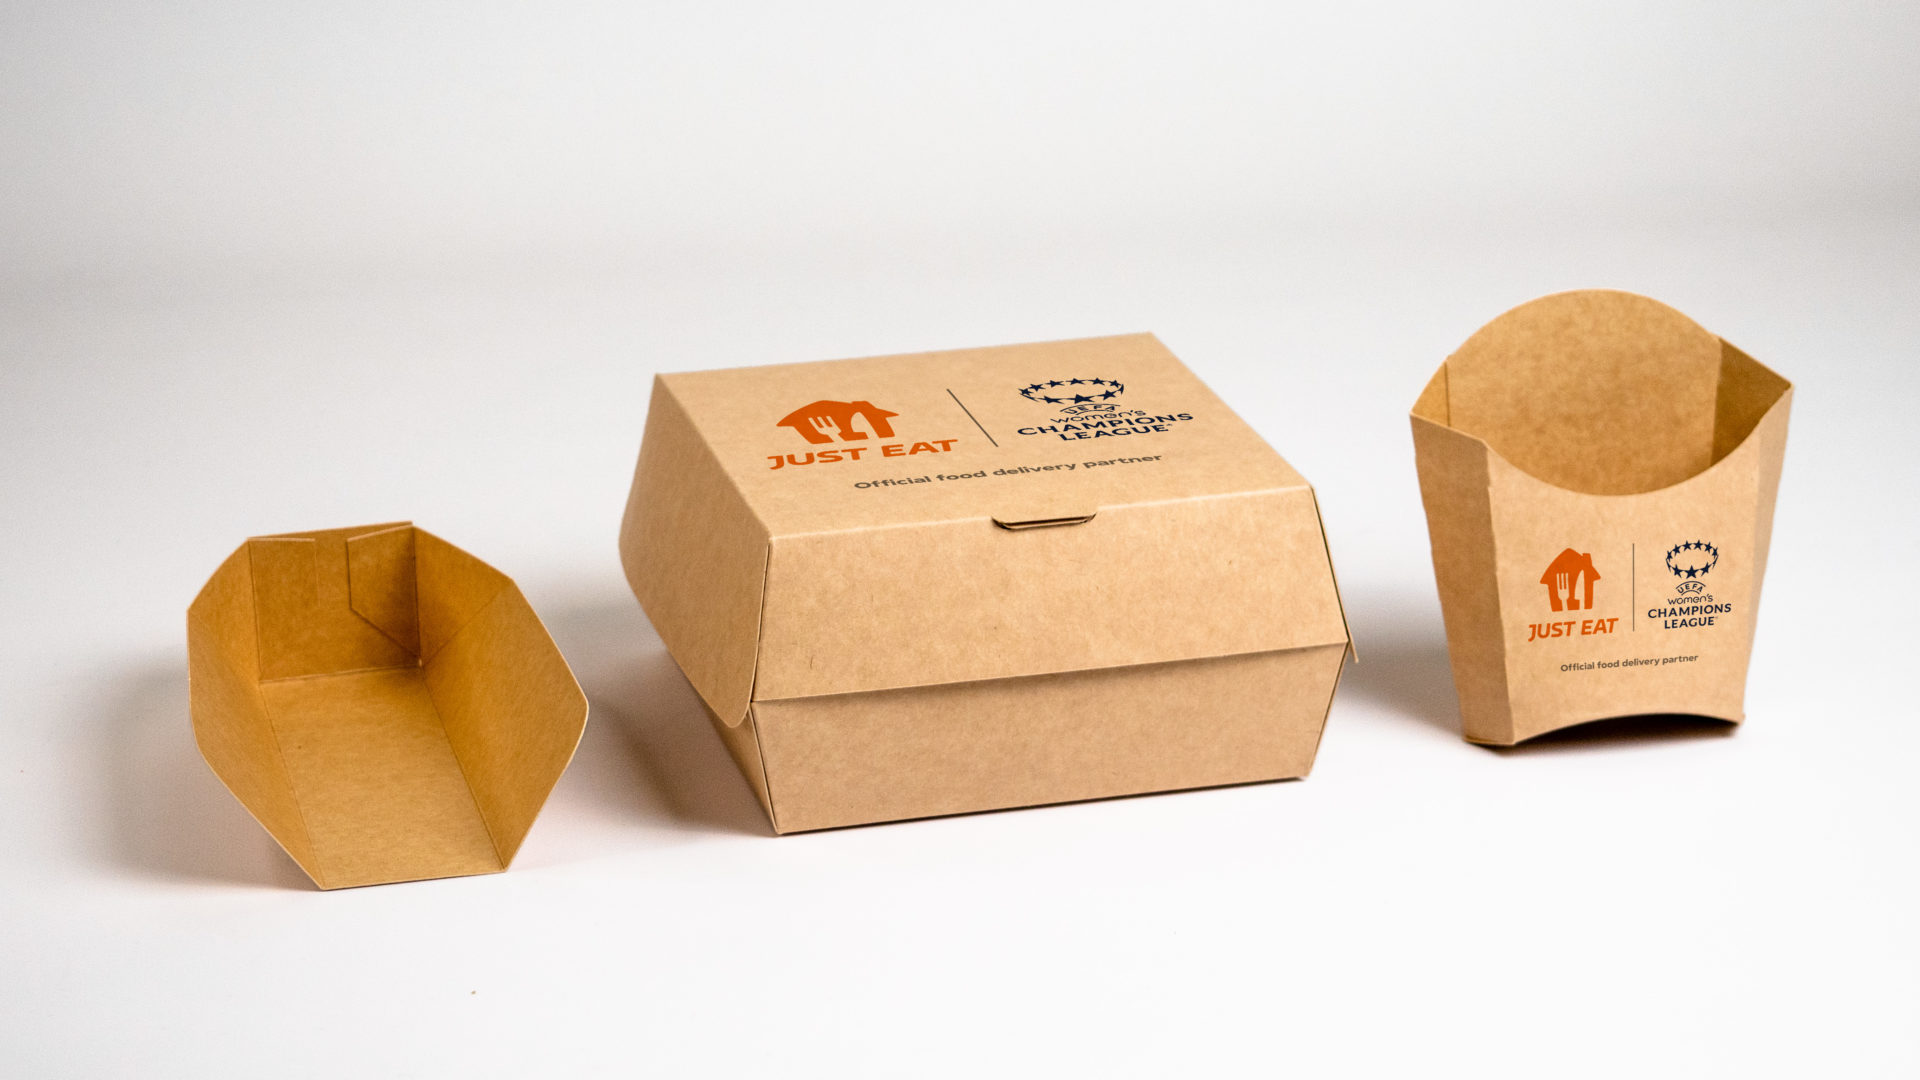 Just Eat Takeaway.com brings seaweed-lined packaging to the UEFA Finals in Seville and Turin